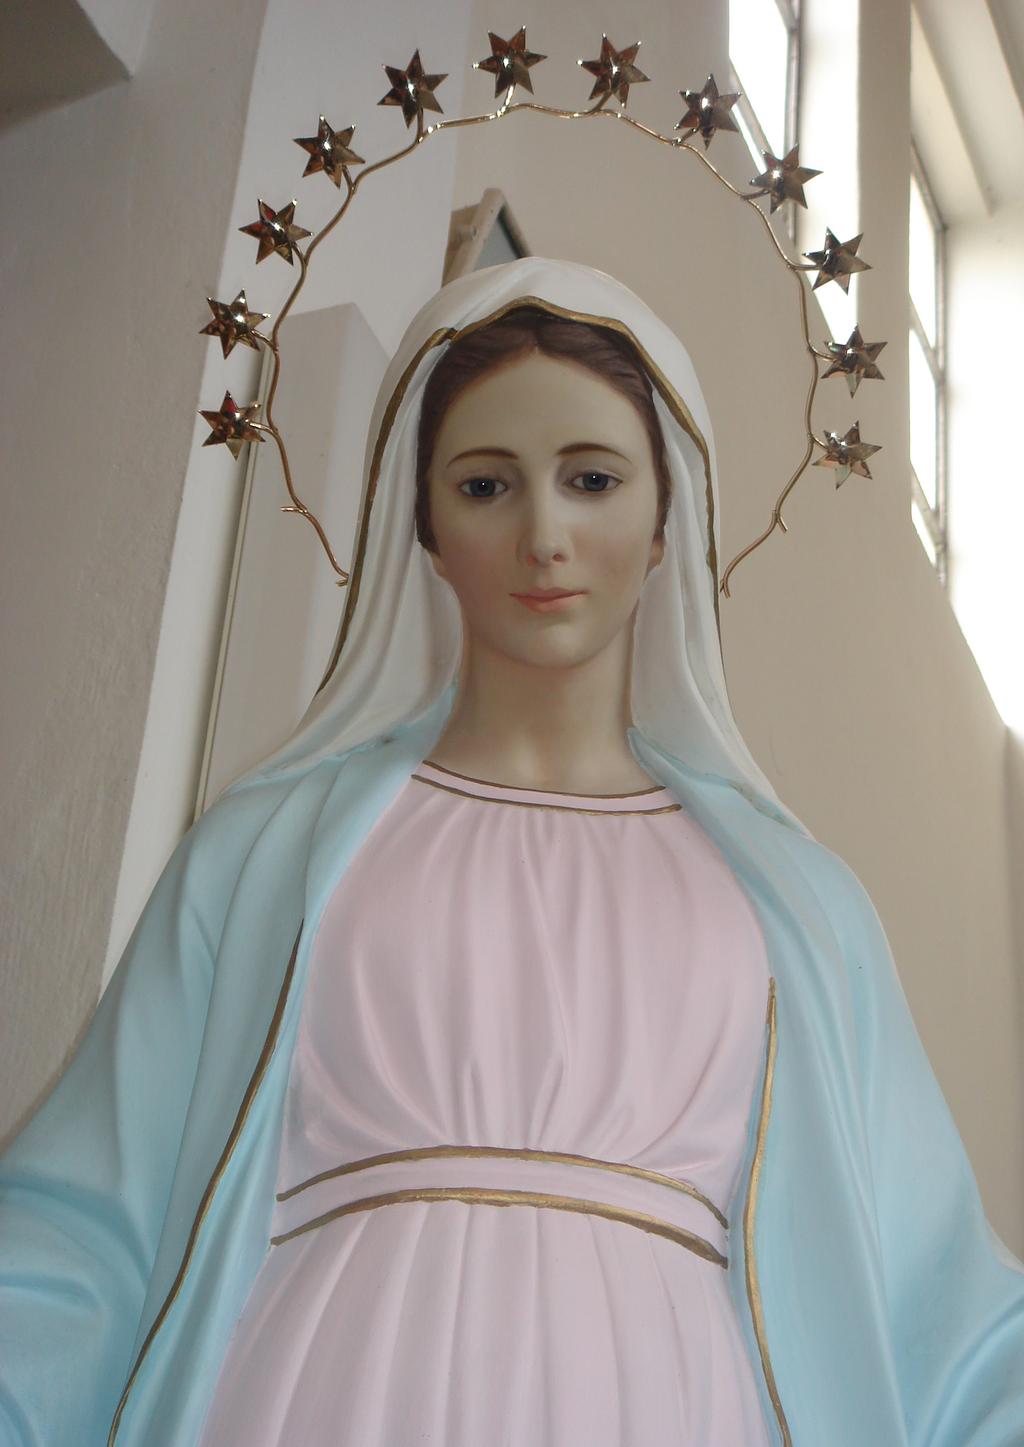 MEDJUGORJE MESSAGE Medjugorje is a favored place chosen by God in which the Holy Virgin Mary has appeared daily for nearly 30 years IN A SPECIAL WAY I HAVE CHOSEN THIS